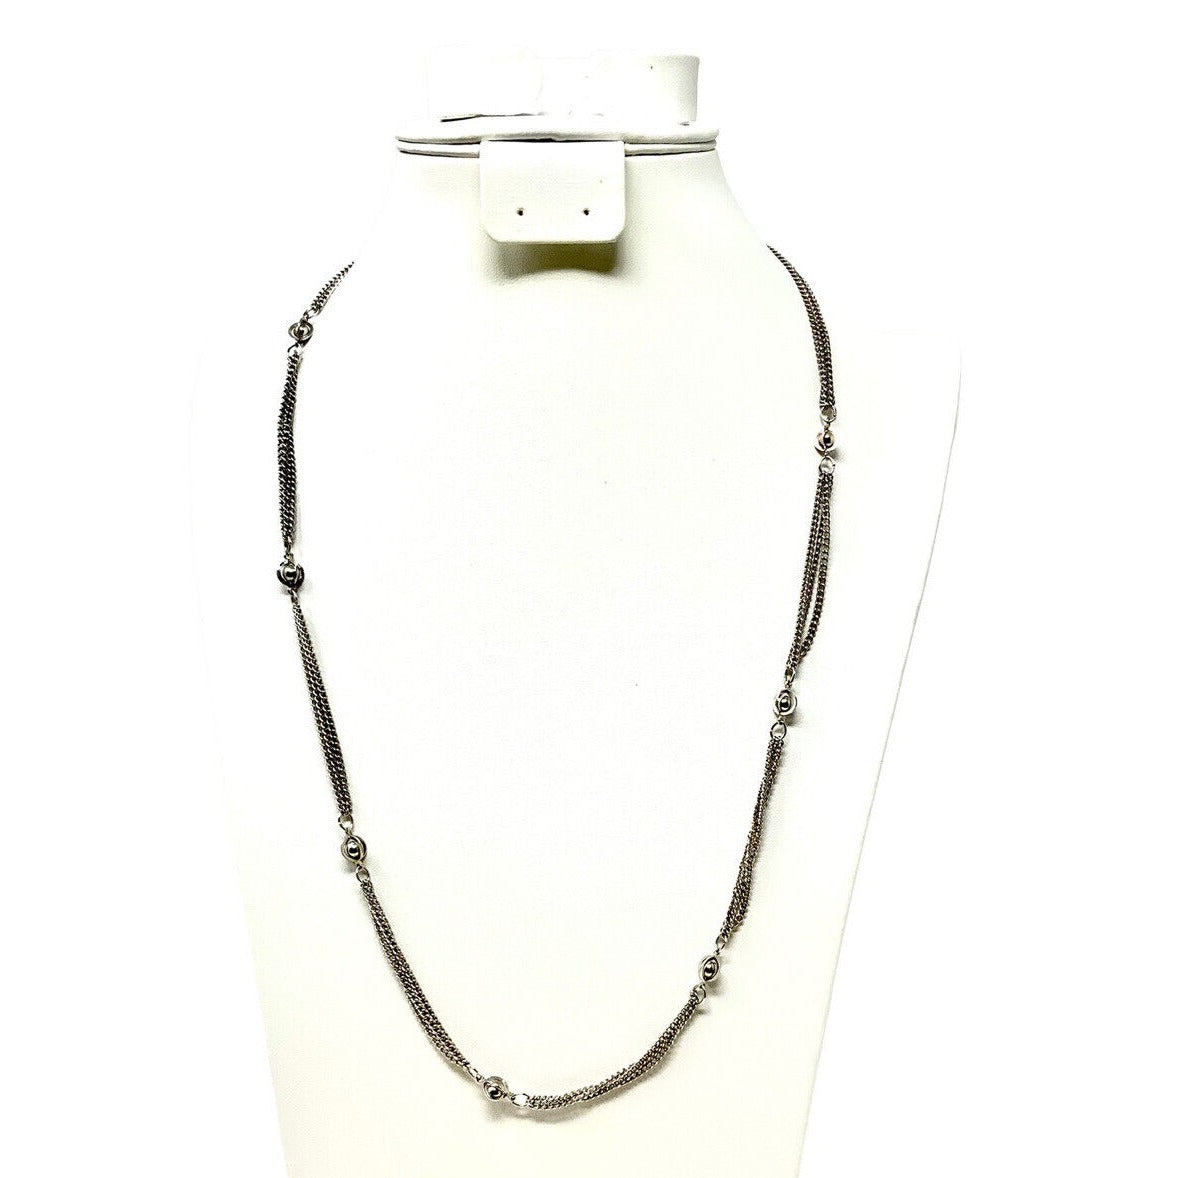 Silver-Tone Multi Chain Link Necklace with Sphere Pendants Throughout